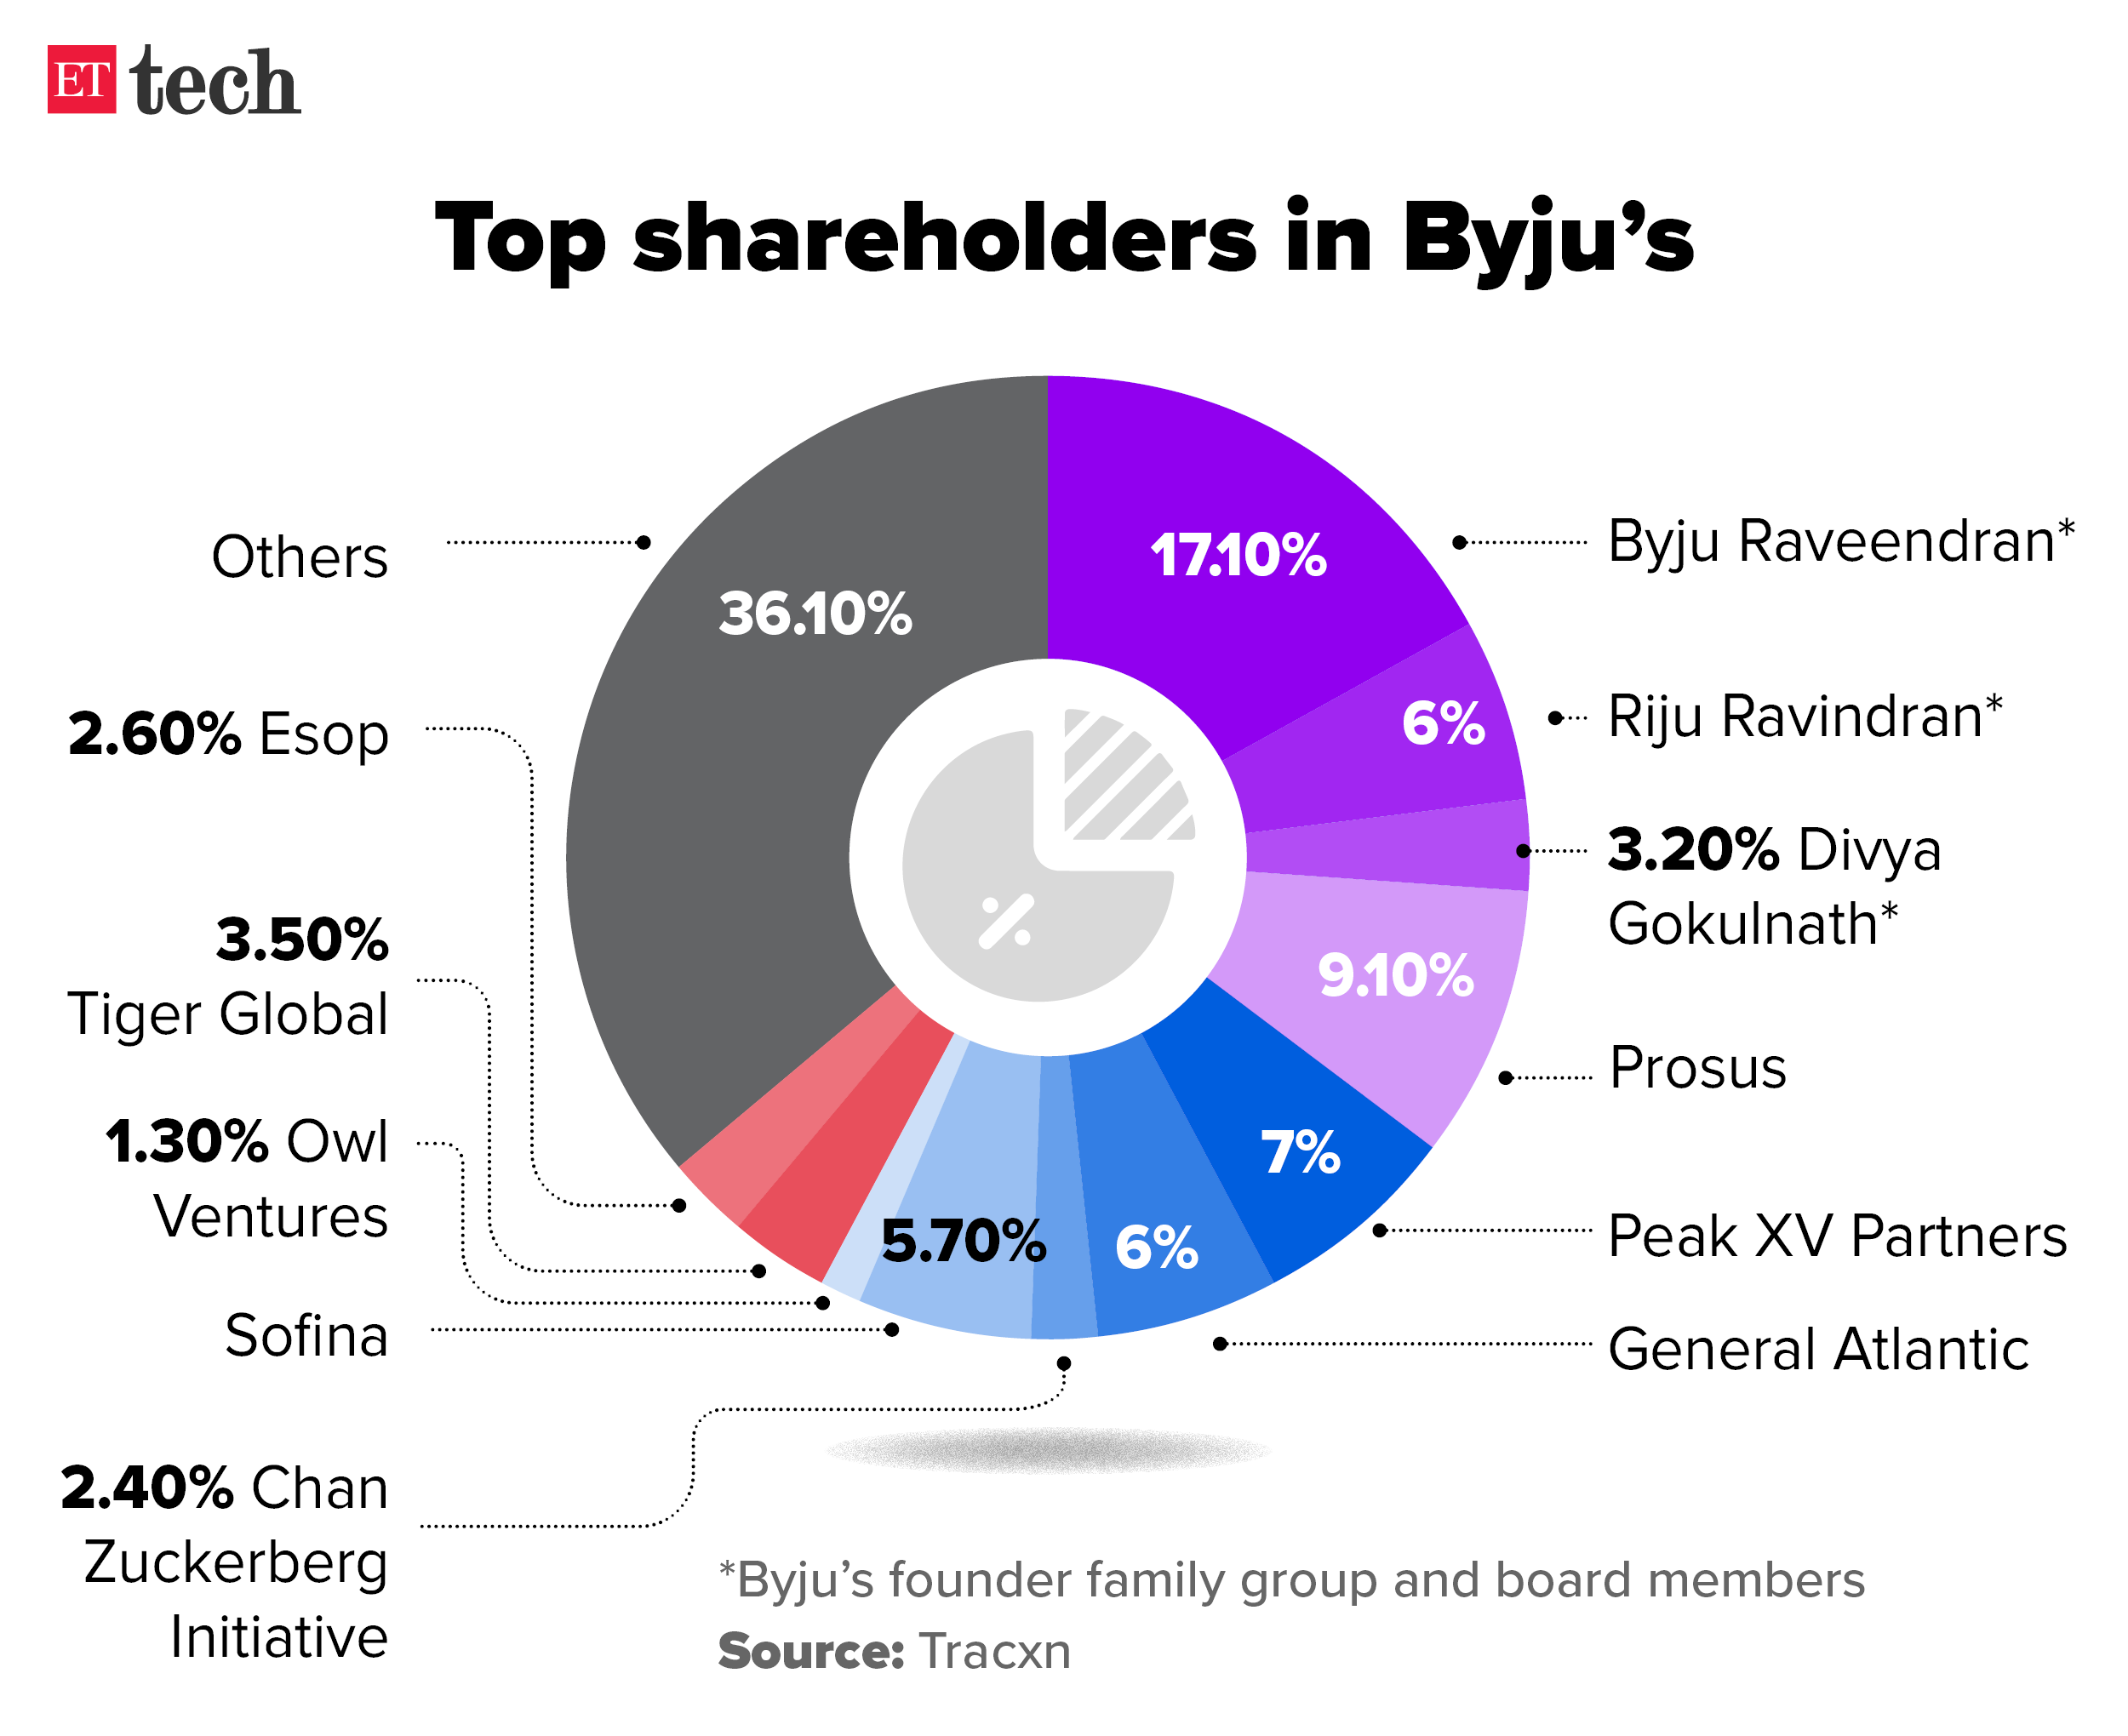 Top shareholders in Byju